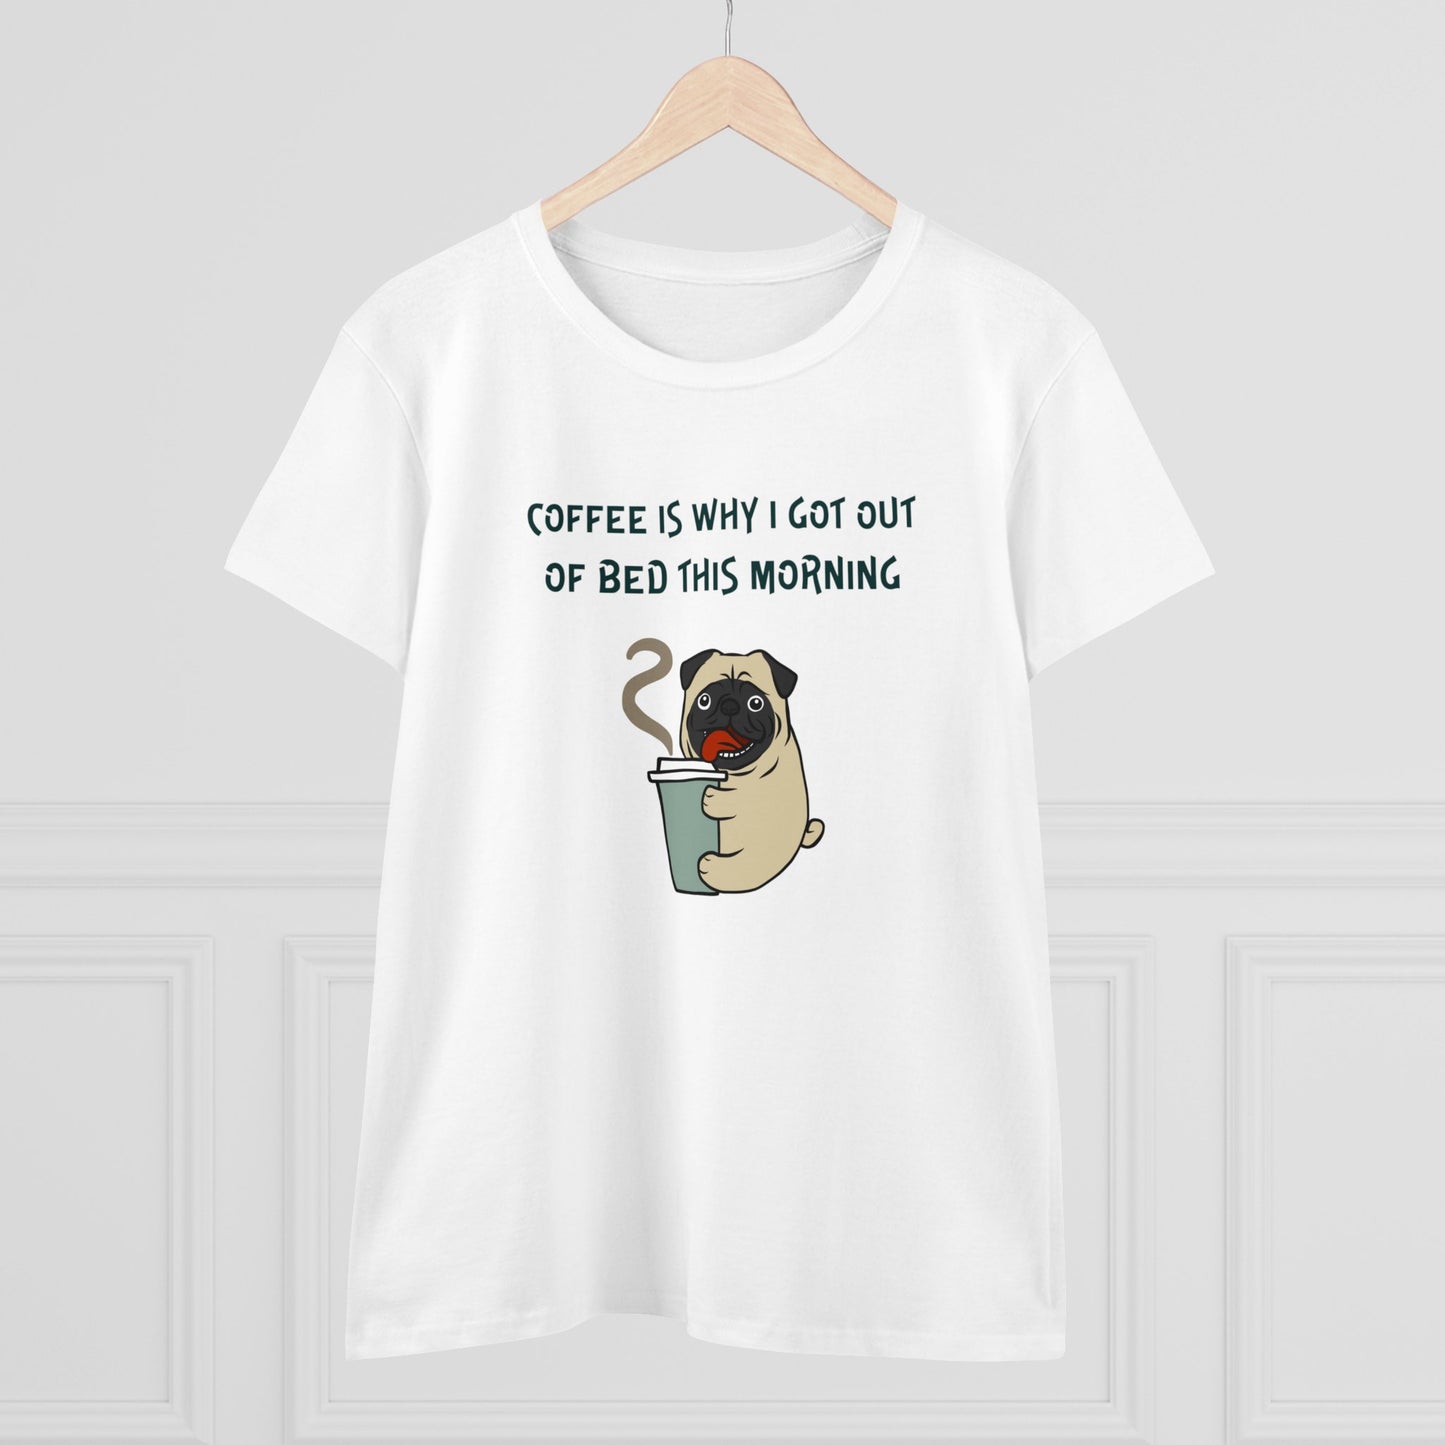 Pete The Bull Dog. Coffee Is Why I Got Out of Bed This Morning.  Women's Midweight Cotton Tee